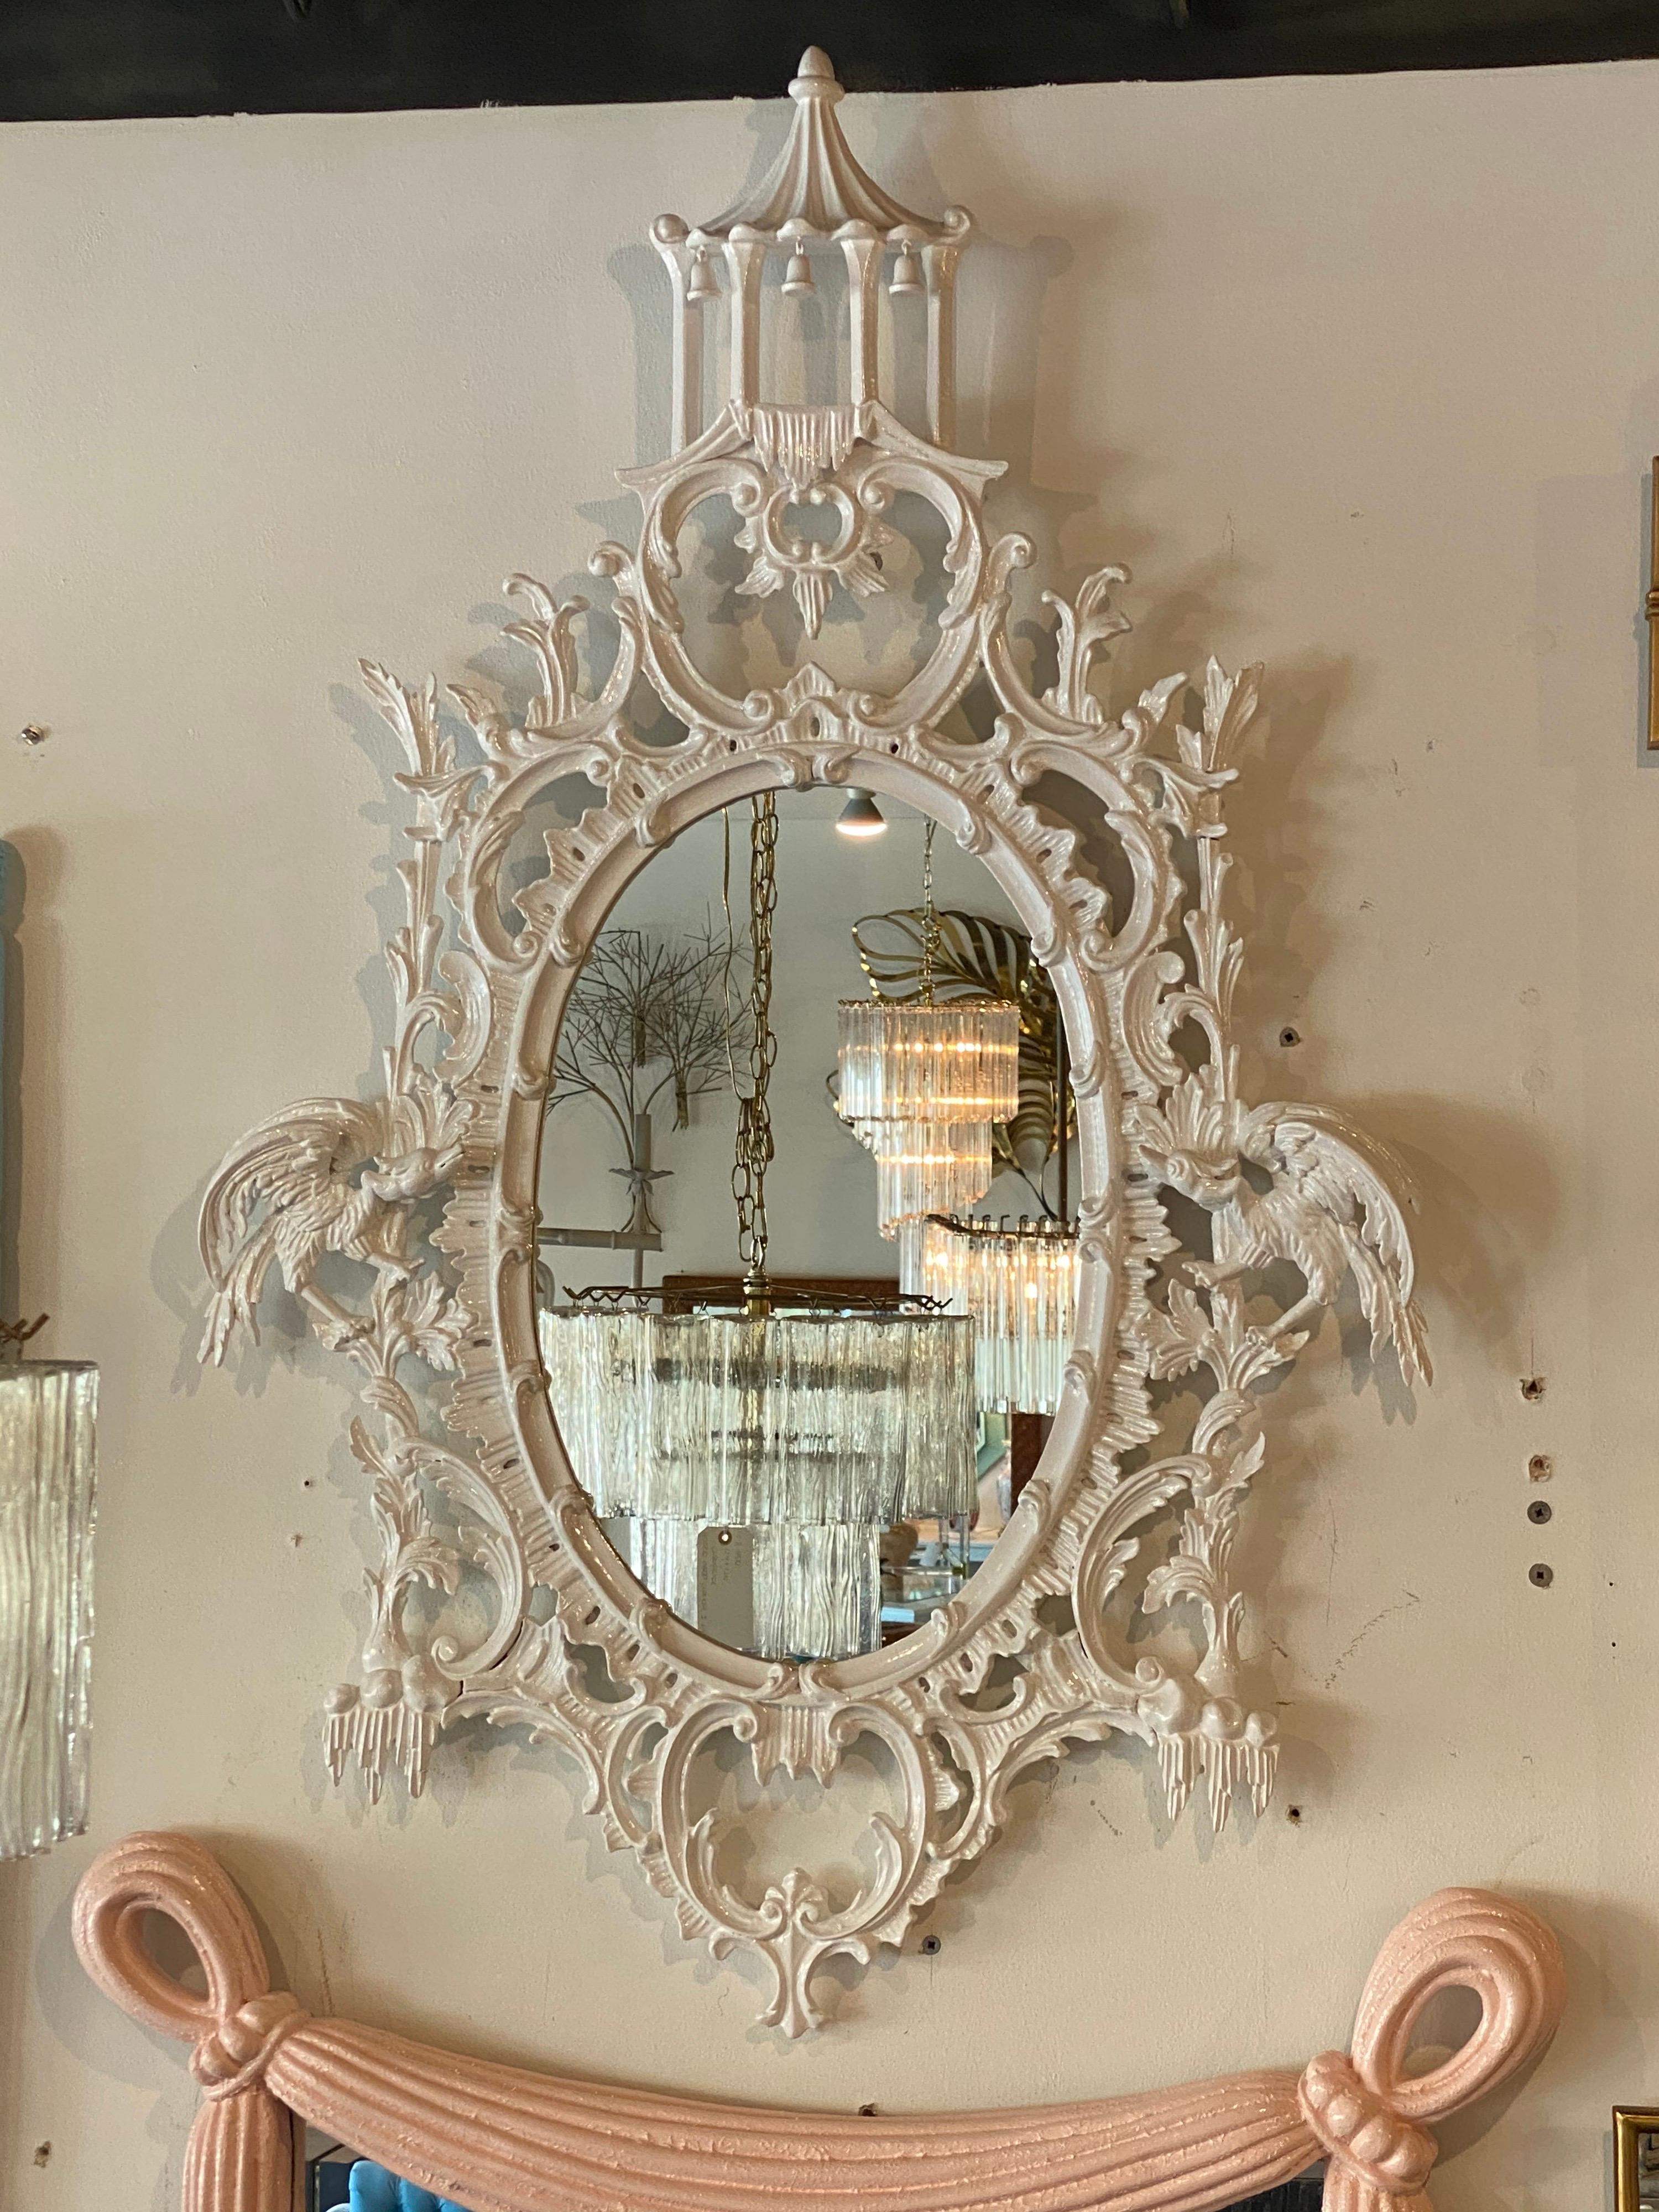 Lovely vintage wood La Barge (marked on the back of the mirror) wall mirror with amazing carved bells and birds, pagoda top. Newly lacquered white. Comes ready to hang on your wall.